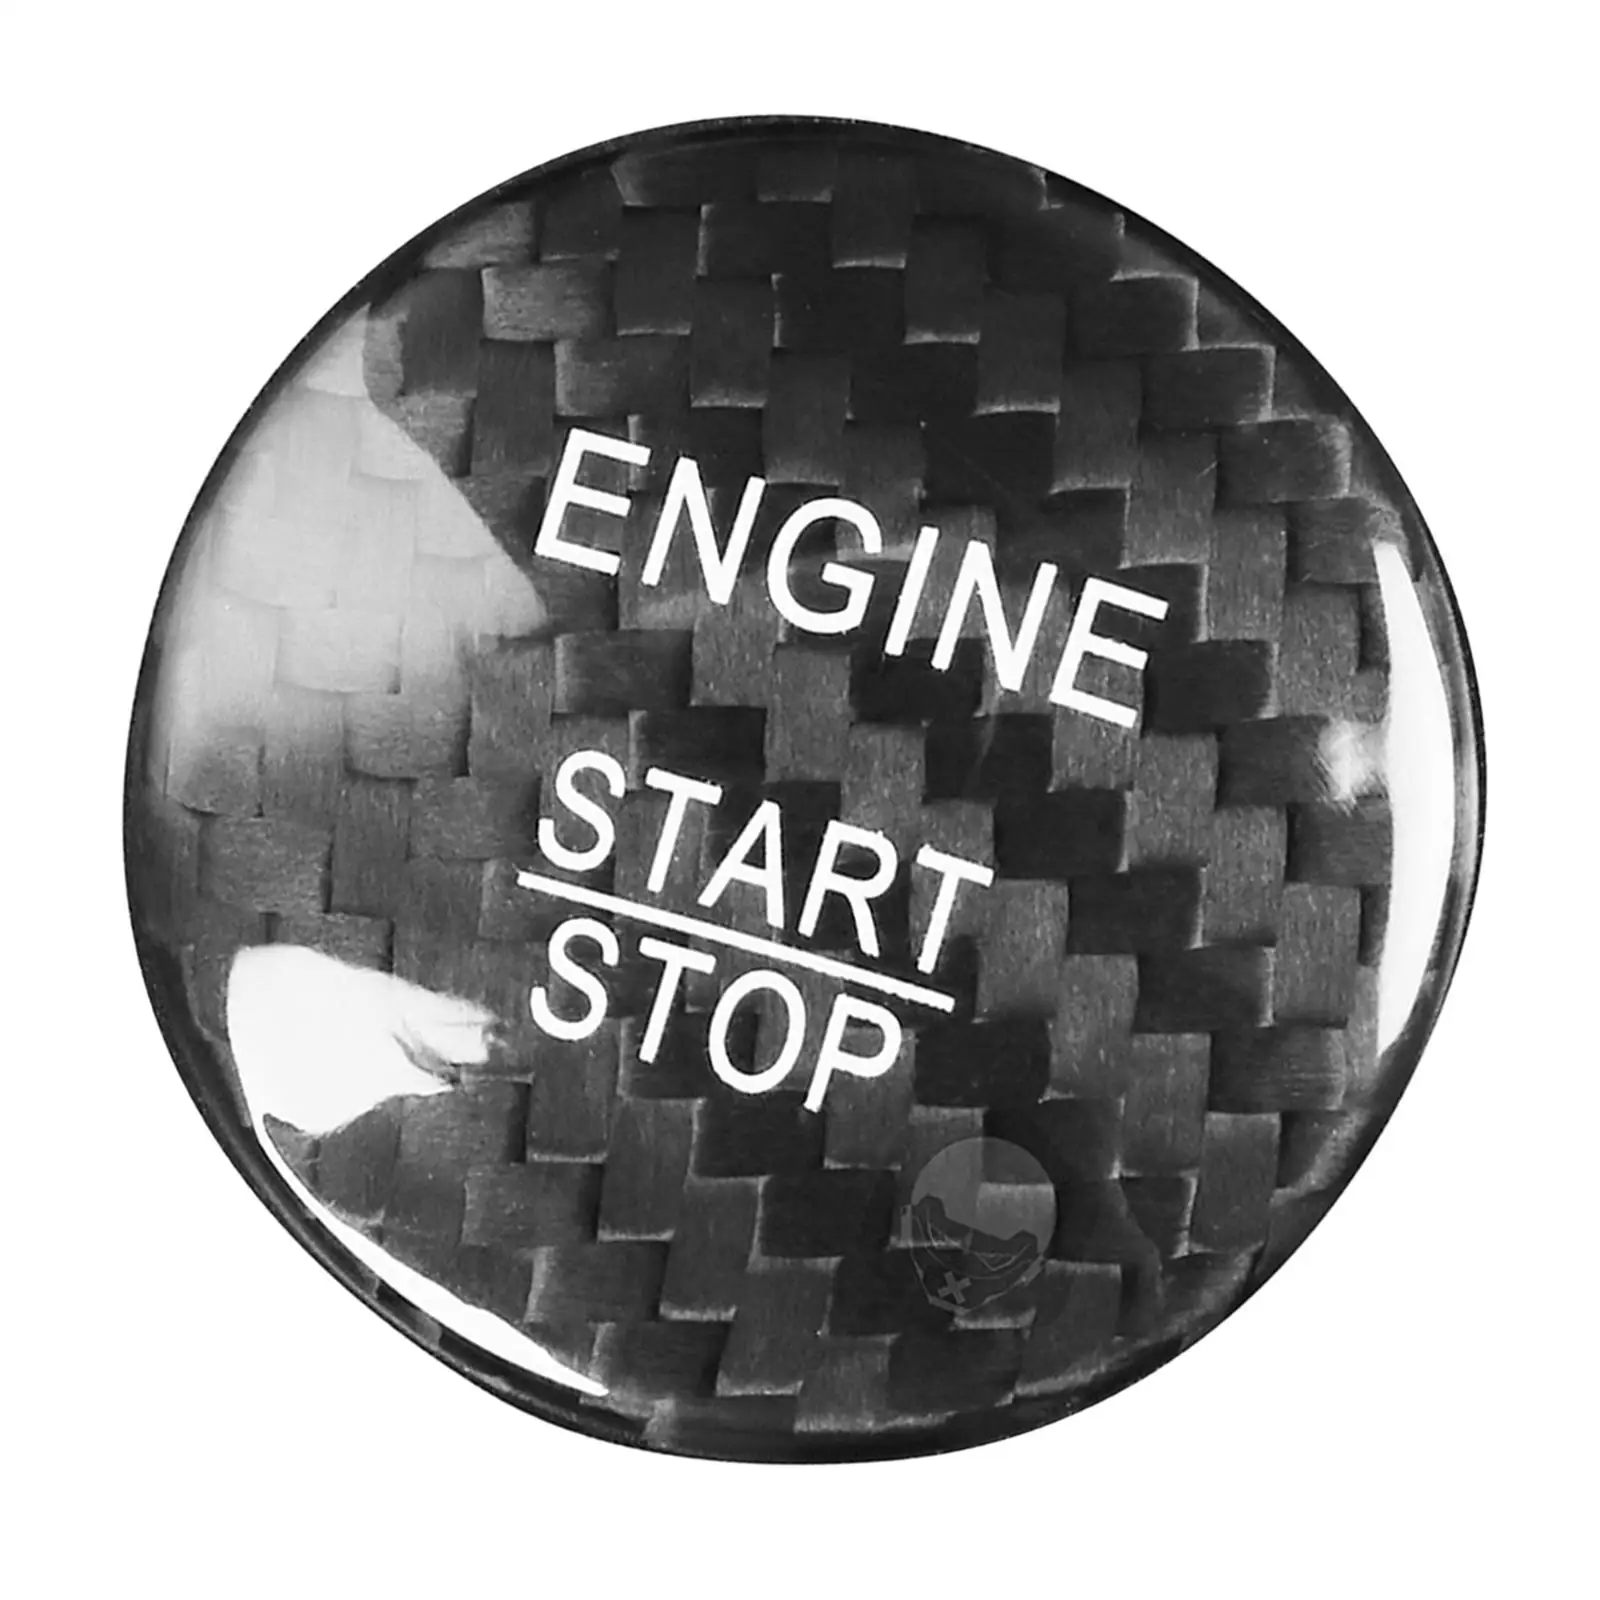 Engine Start Stop Button Cover Fit for A B C GLC Decoration Black